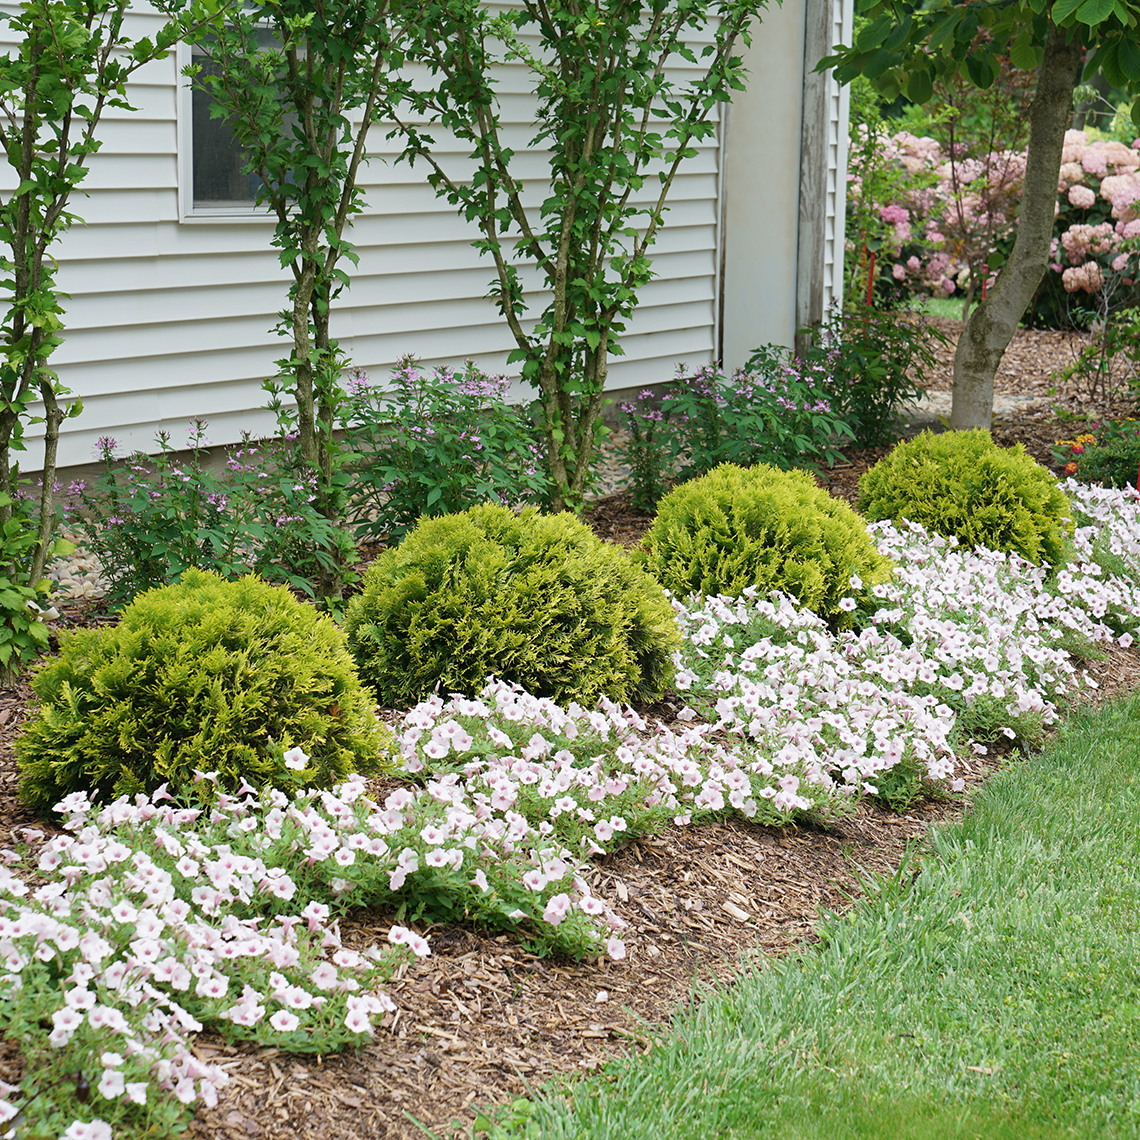 Four Annas Magic Ball dwarf arborvitae in a landscape surrounded by petunias